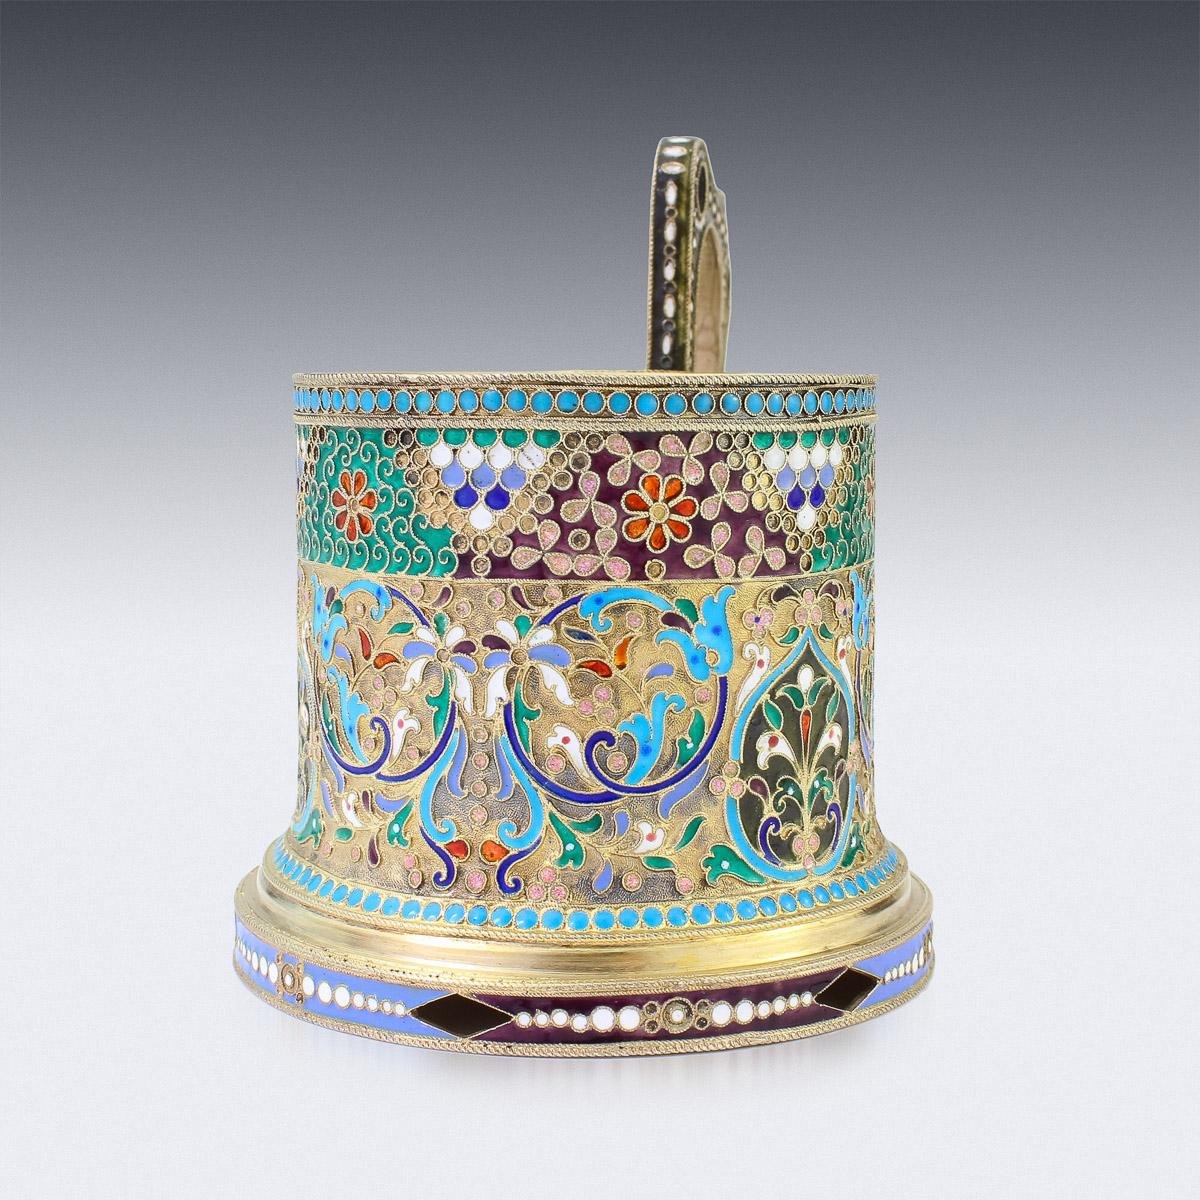 20th Century Imperial Russian Solid Silver-Gilt Enamel Tea Glass Holder, c.1900 2